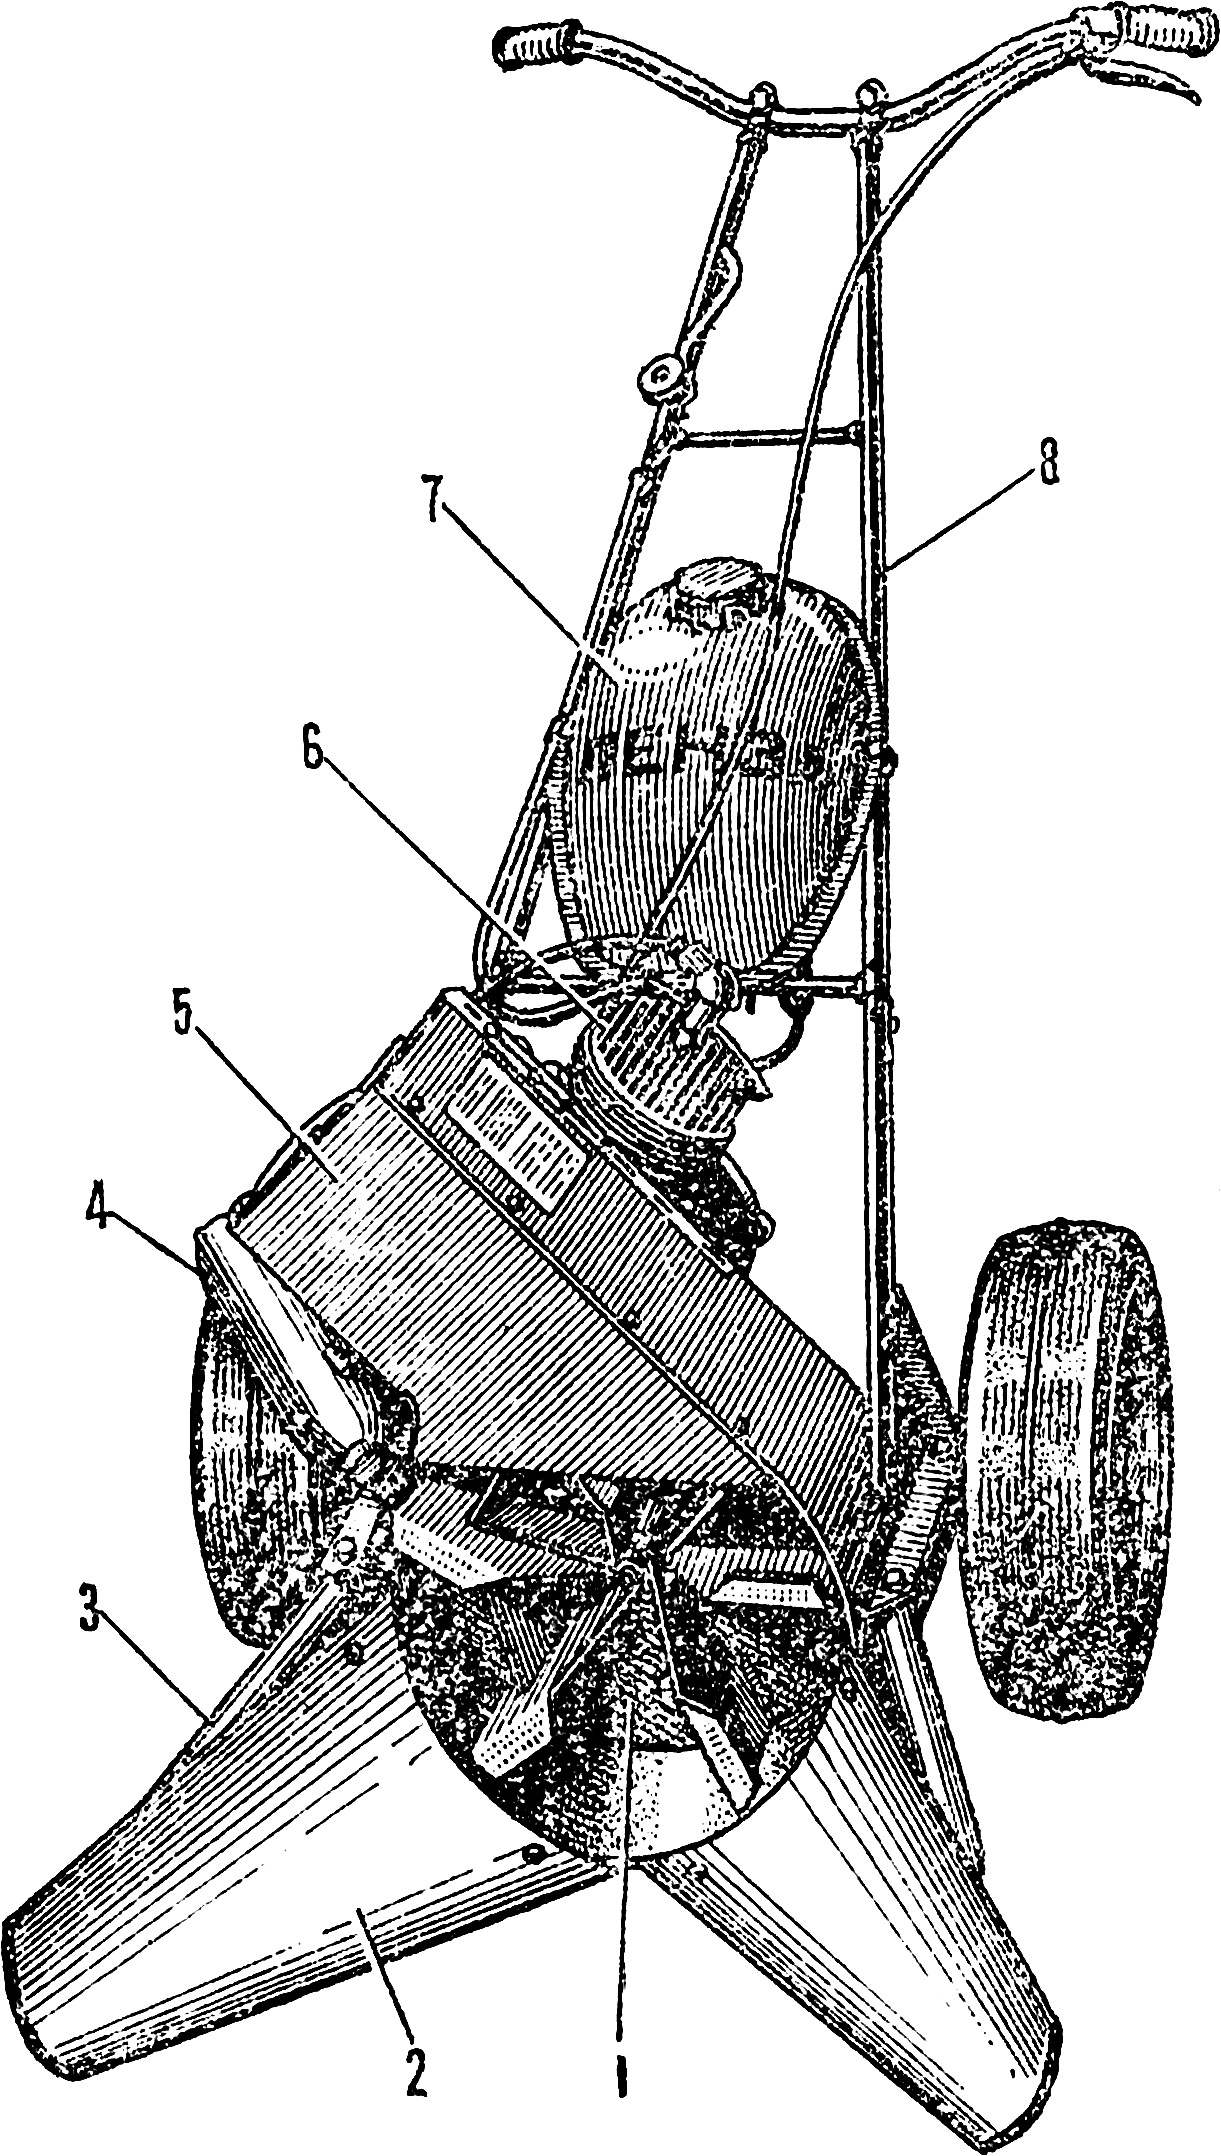 Fig. 1. Rotary snow blower.